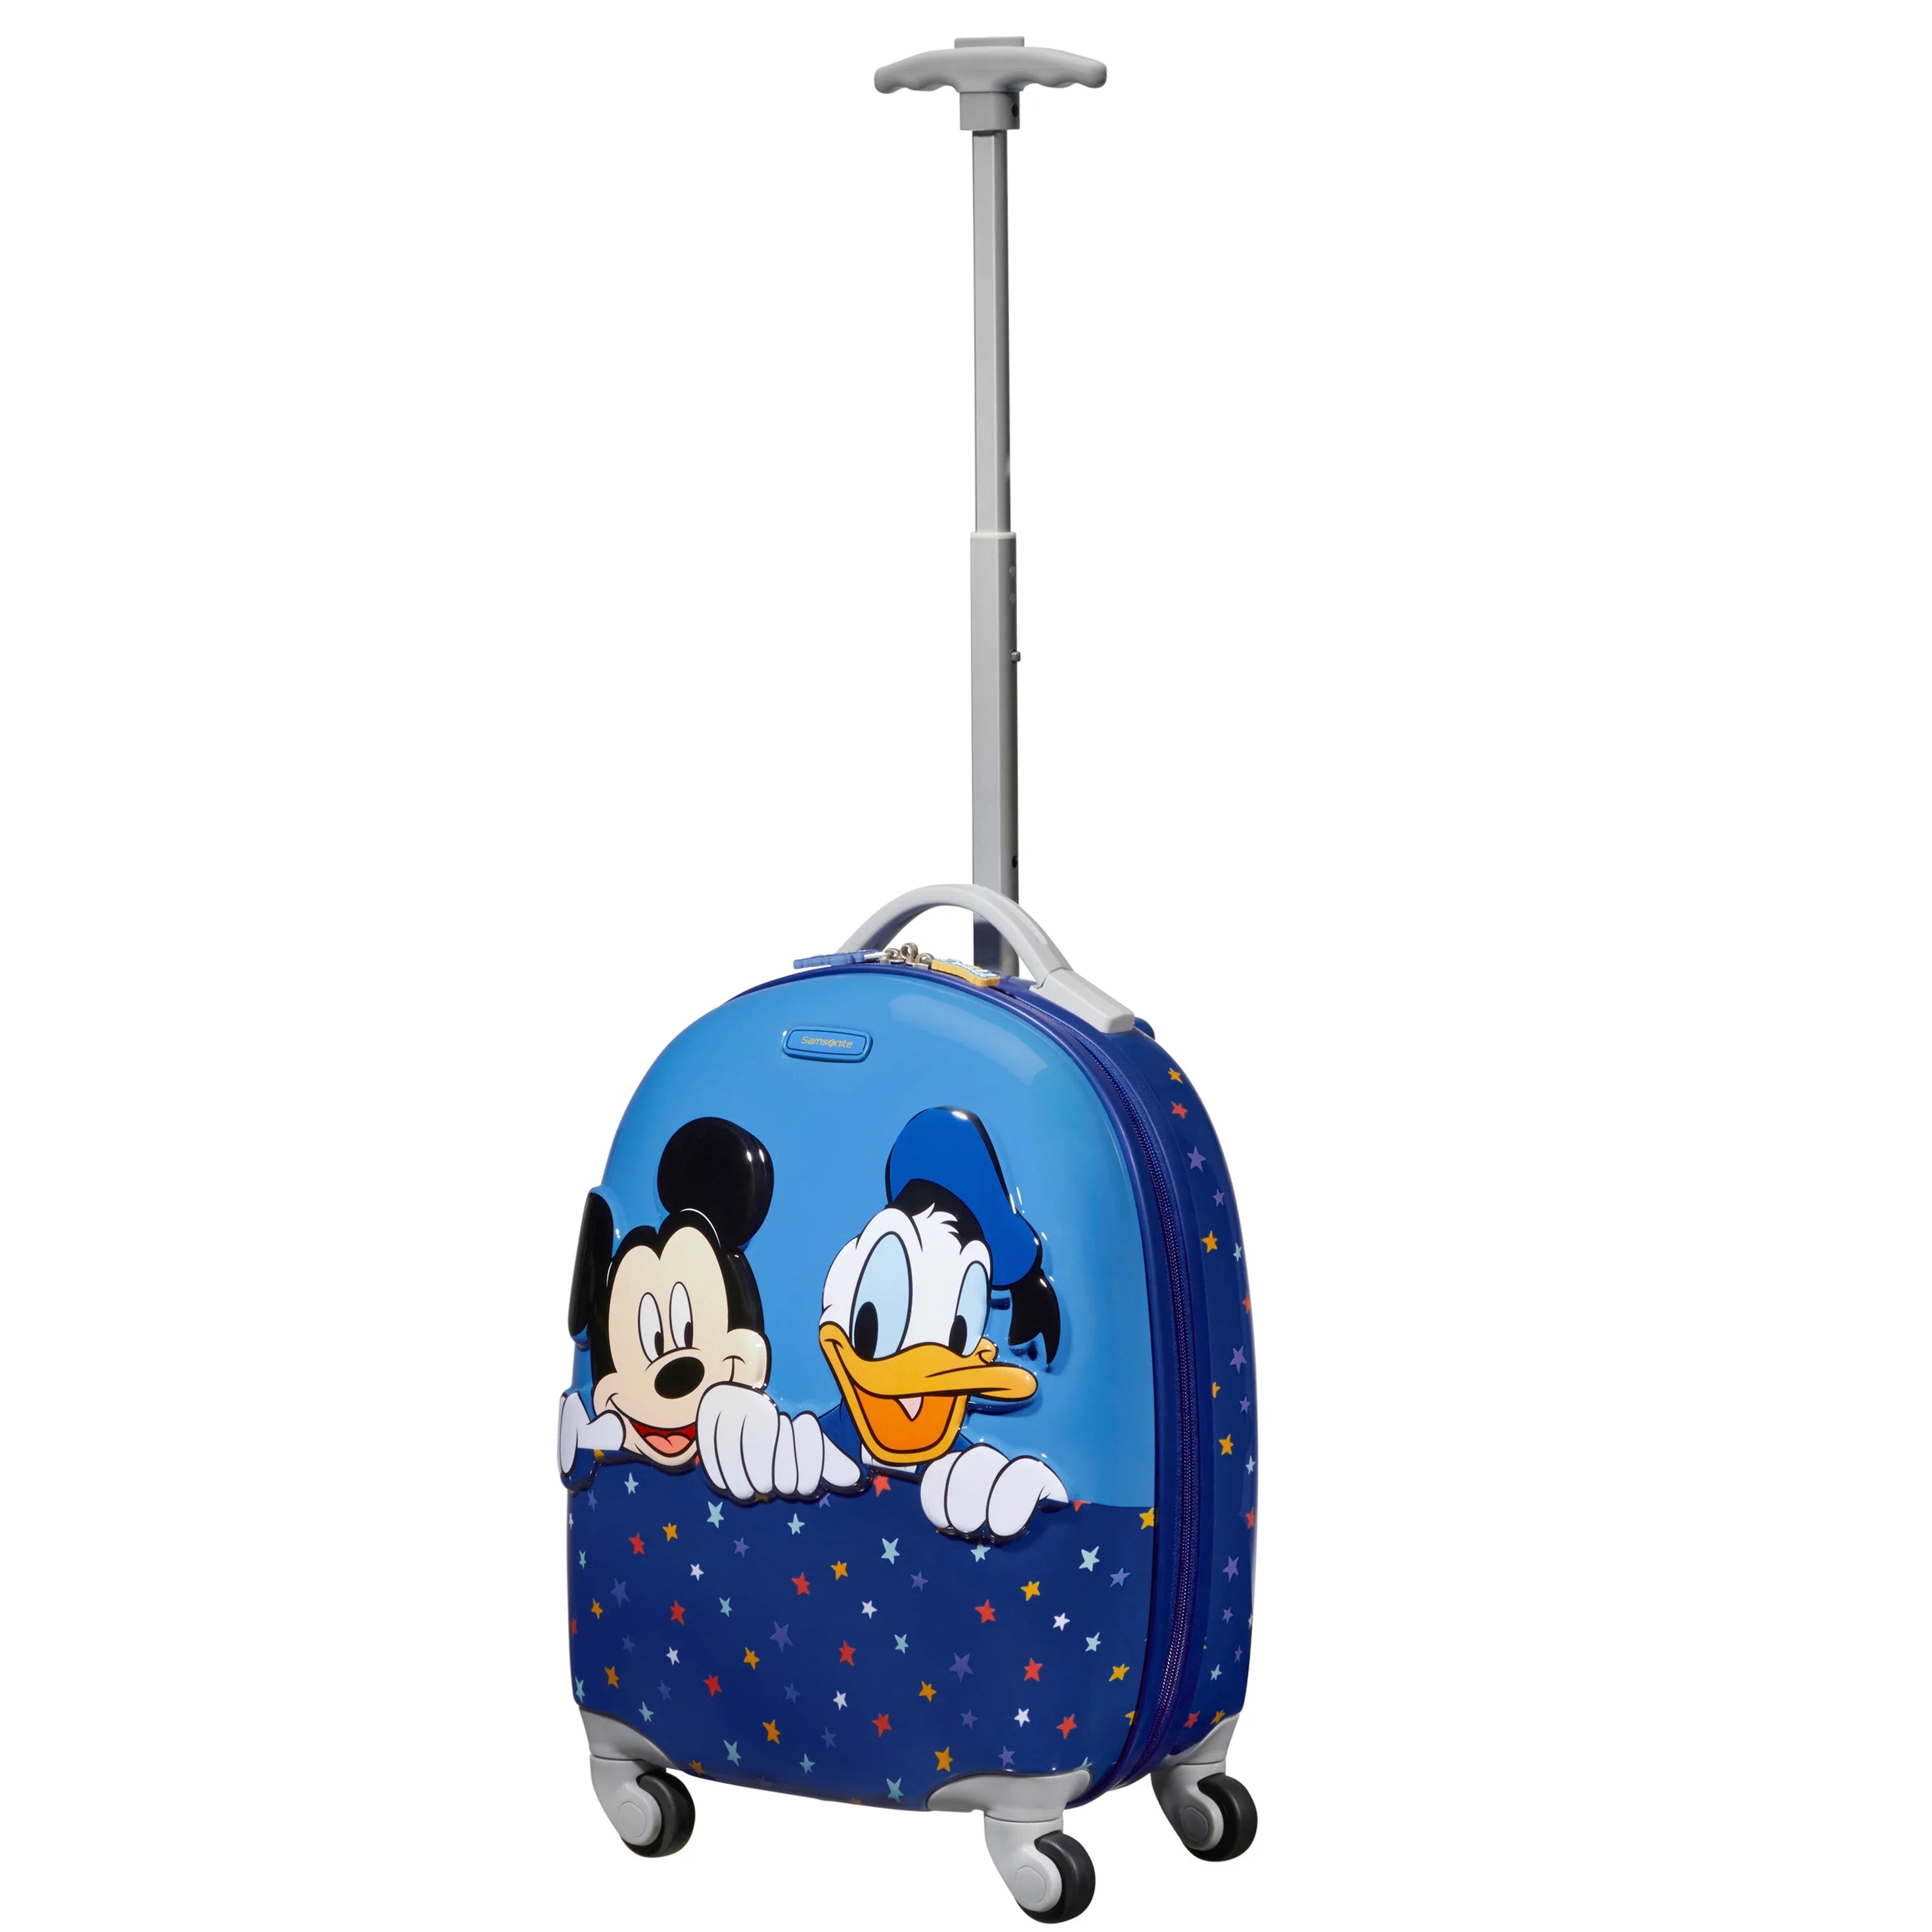 Disney Ulitmate 2.0 travel for Sweet companions - leisure and